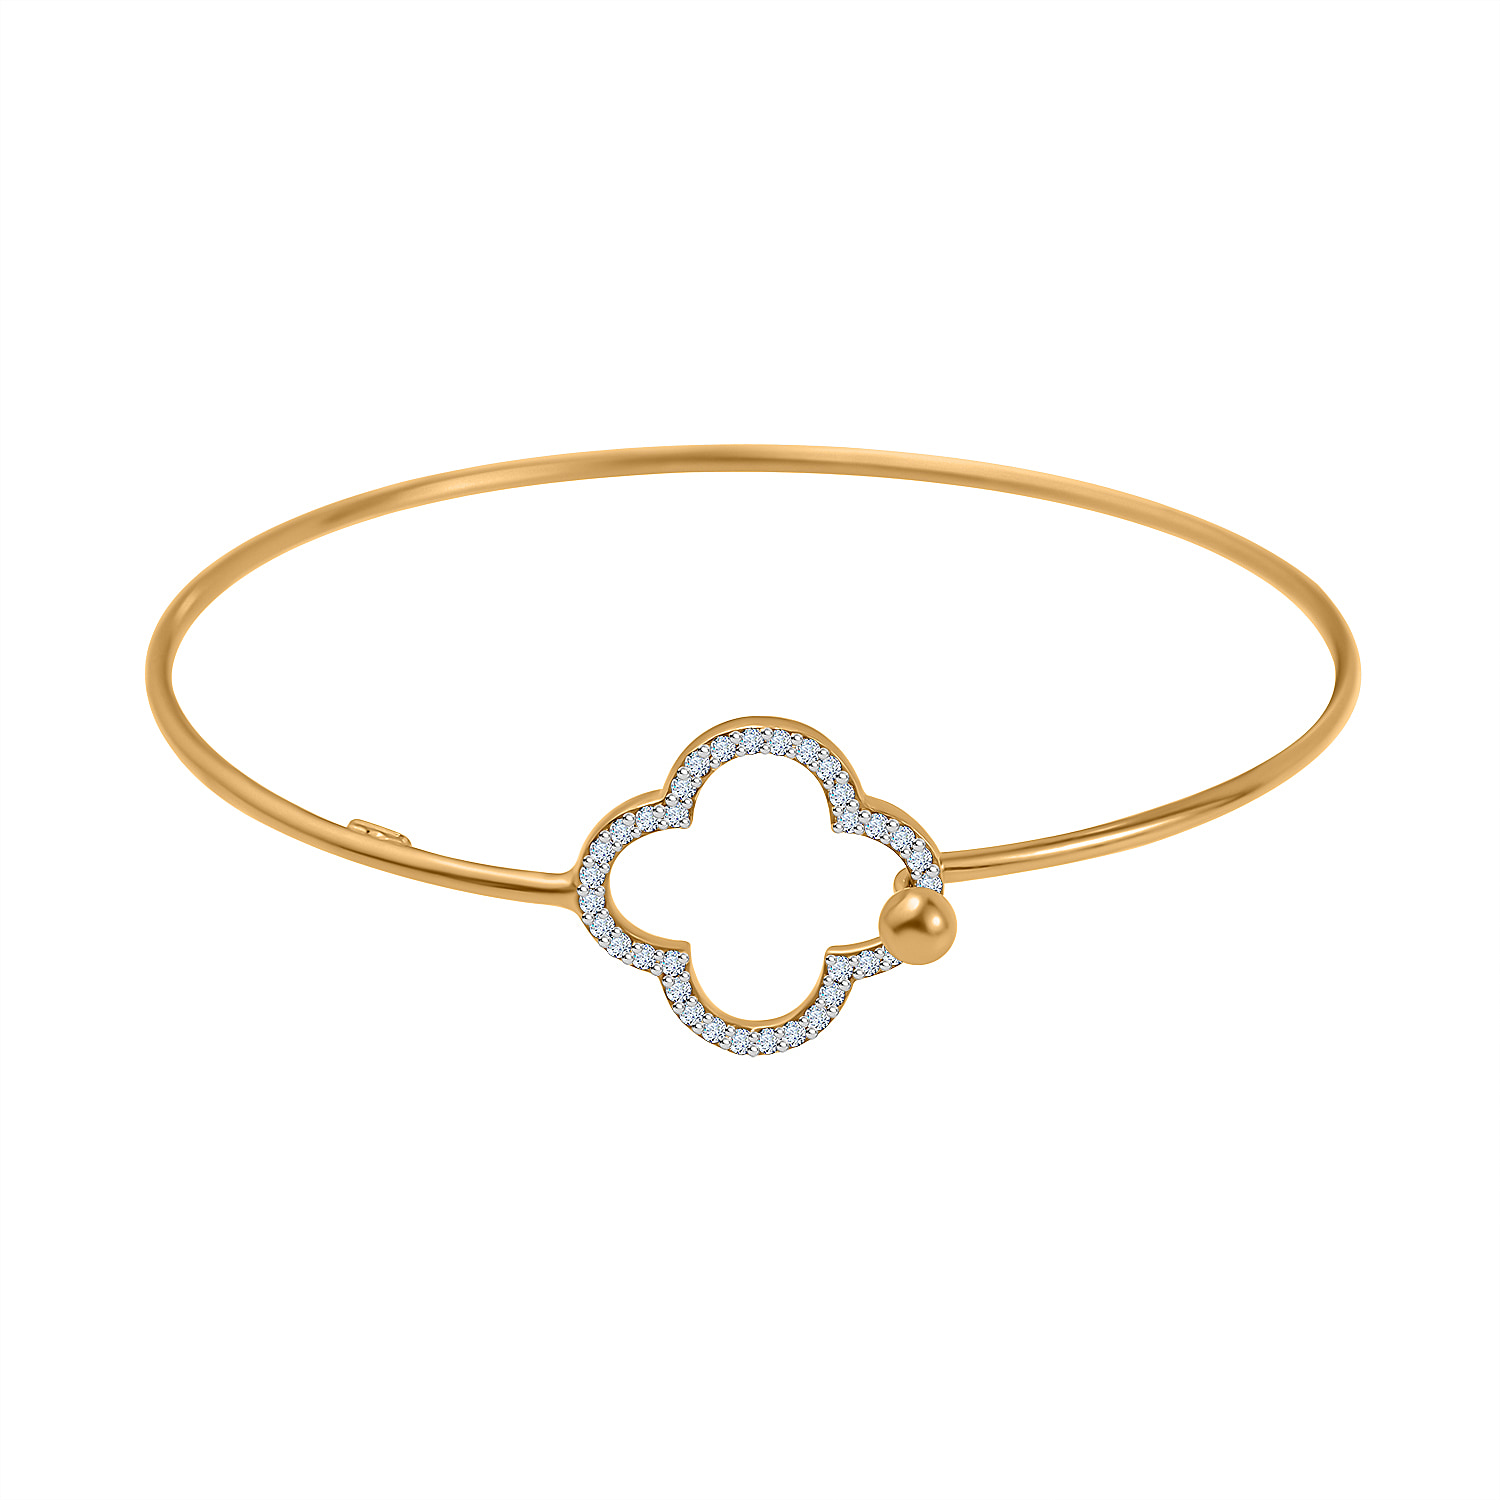 NY Closeout - Zirconia Clover Bangle in 18K Vermeil Yellow Gold Plated Sterling Silver (Size - 7.5)